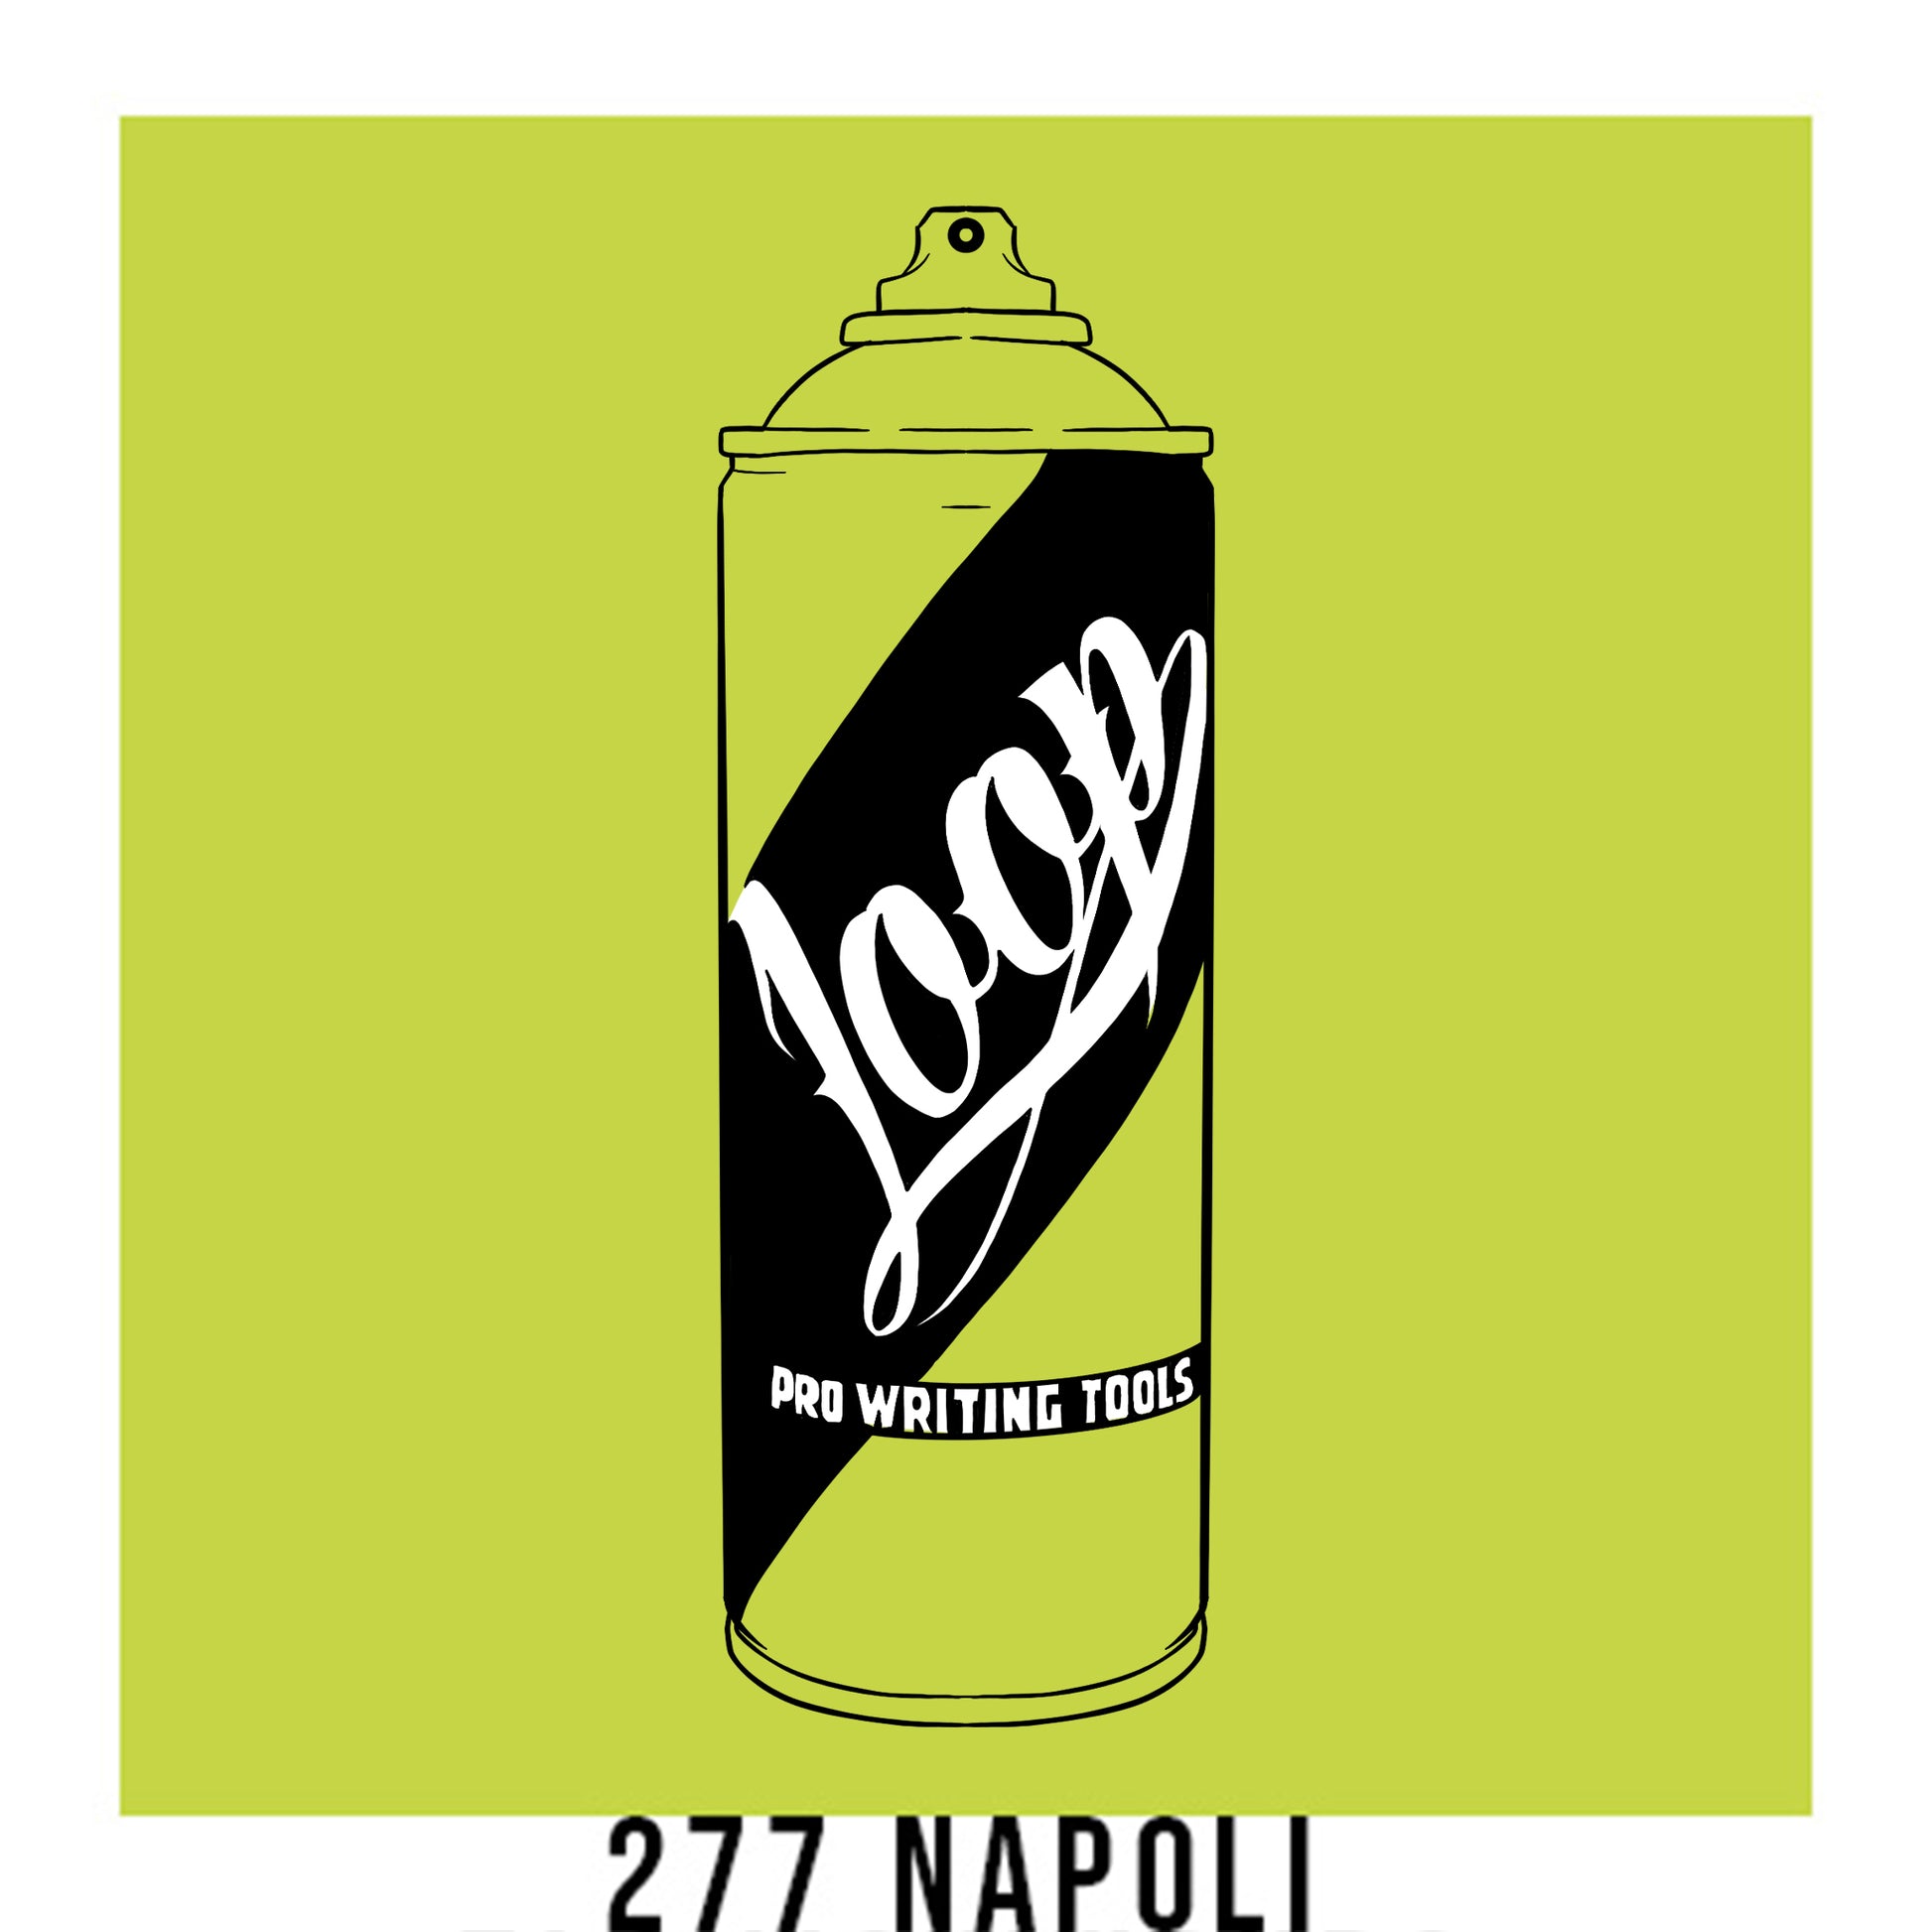 A black outline drawing of a Lime Green spray paint can with the word "Loop" written on the face in script. The background is a color swatch of the same lime Green with a white border with the words "277 Napoli" at the bottom.